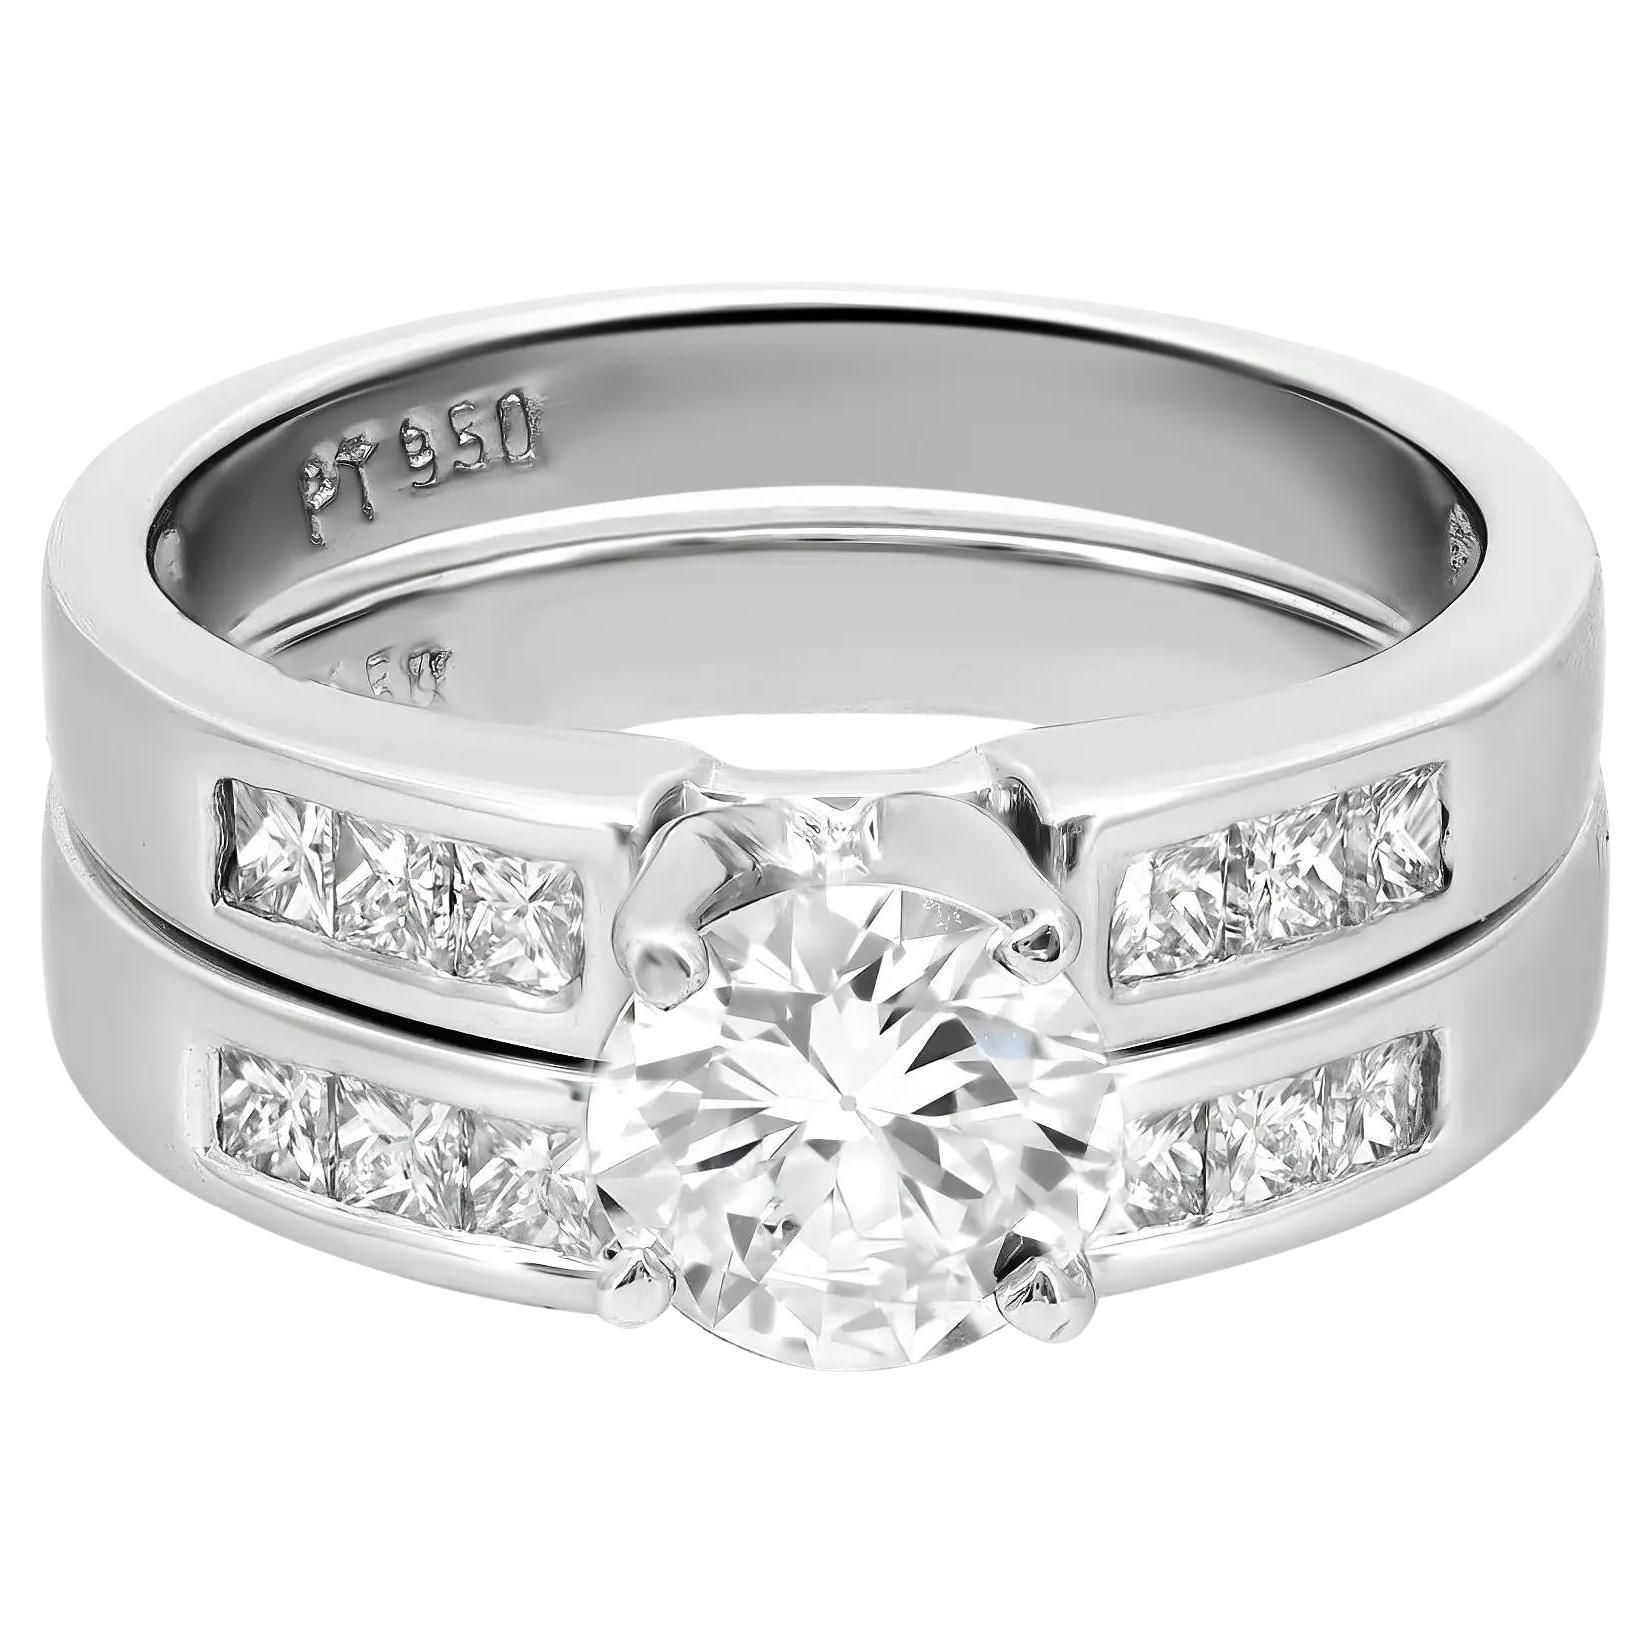 GIA Certified Round Cut Diamond Engagement Ring Set Platinum 0.79Cttw Size 5.5 For Sale